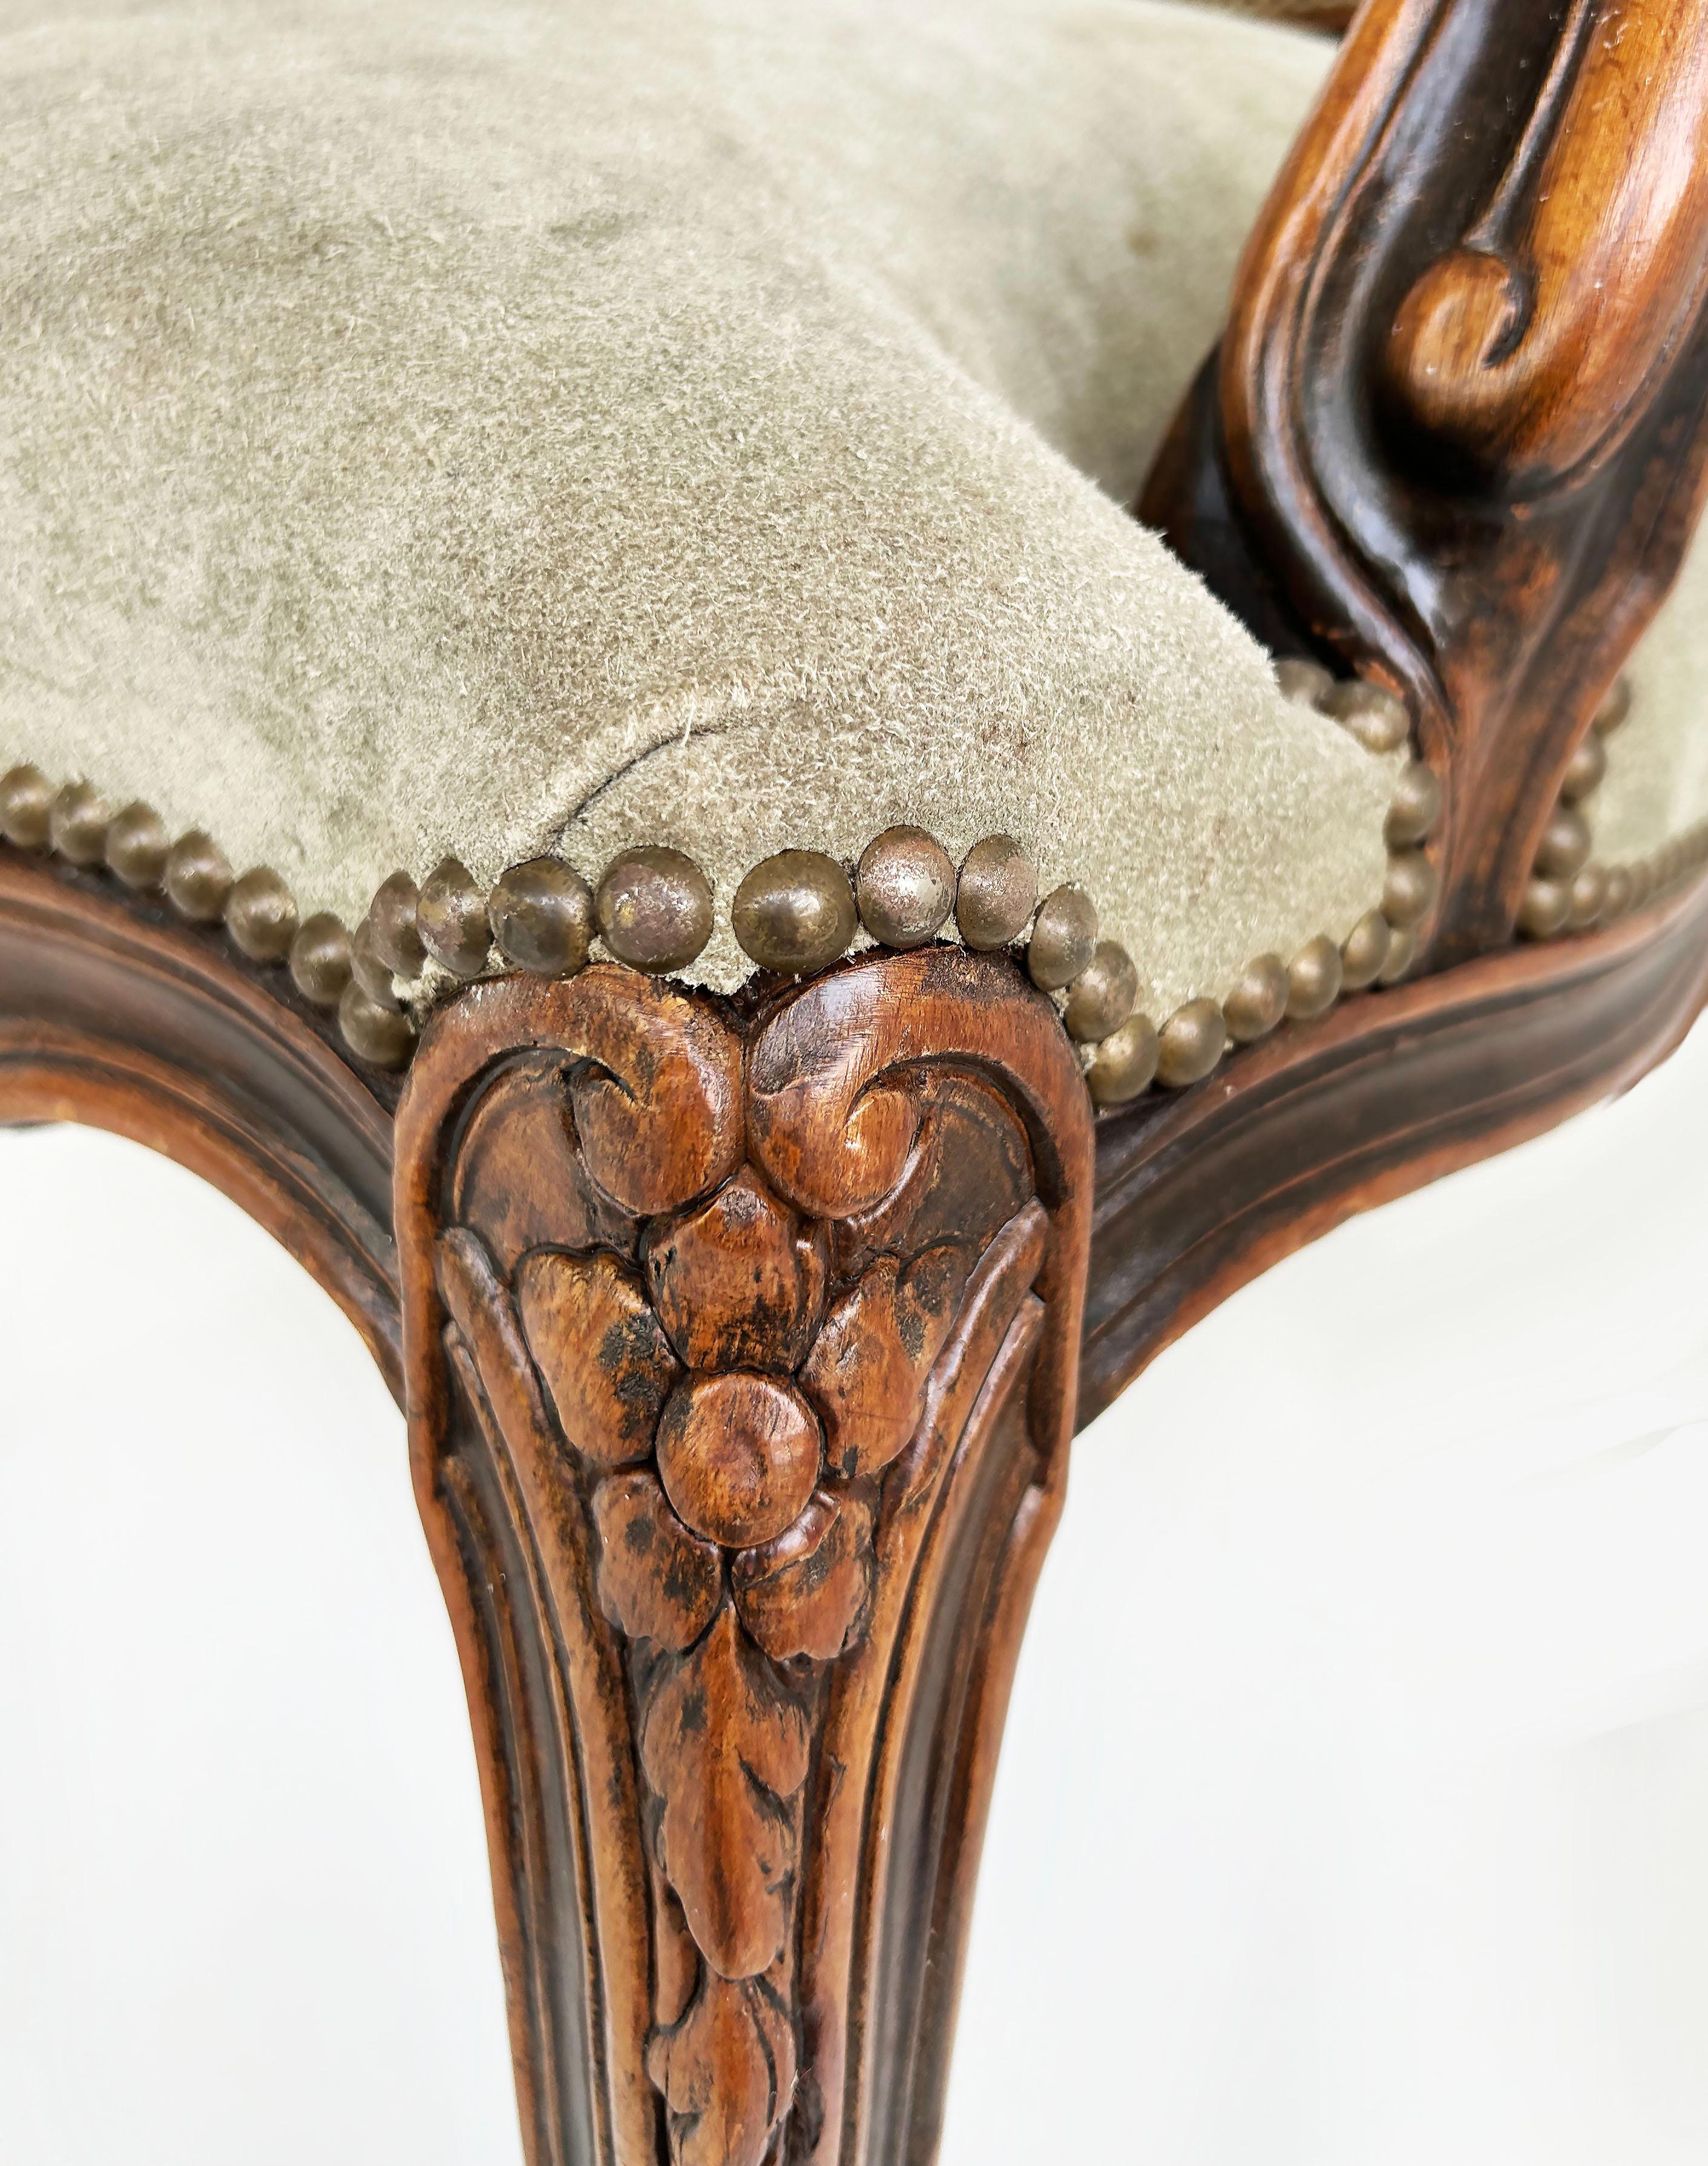 Italian Chateau d'Ax Carved Armchairs in Suede with Brass NailHeads, Pair For Sale 8